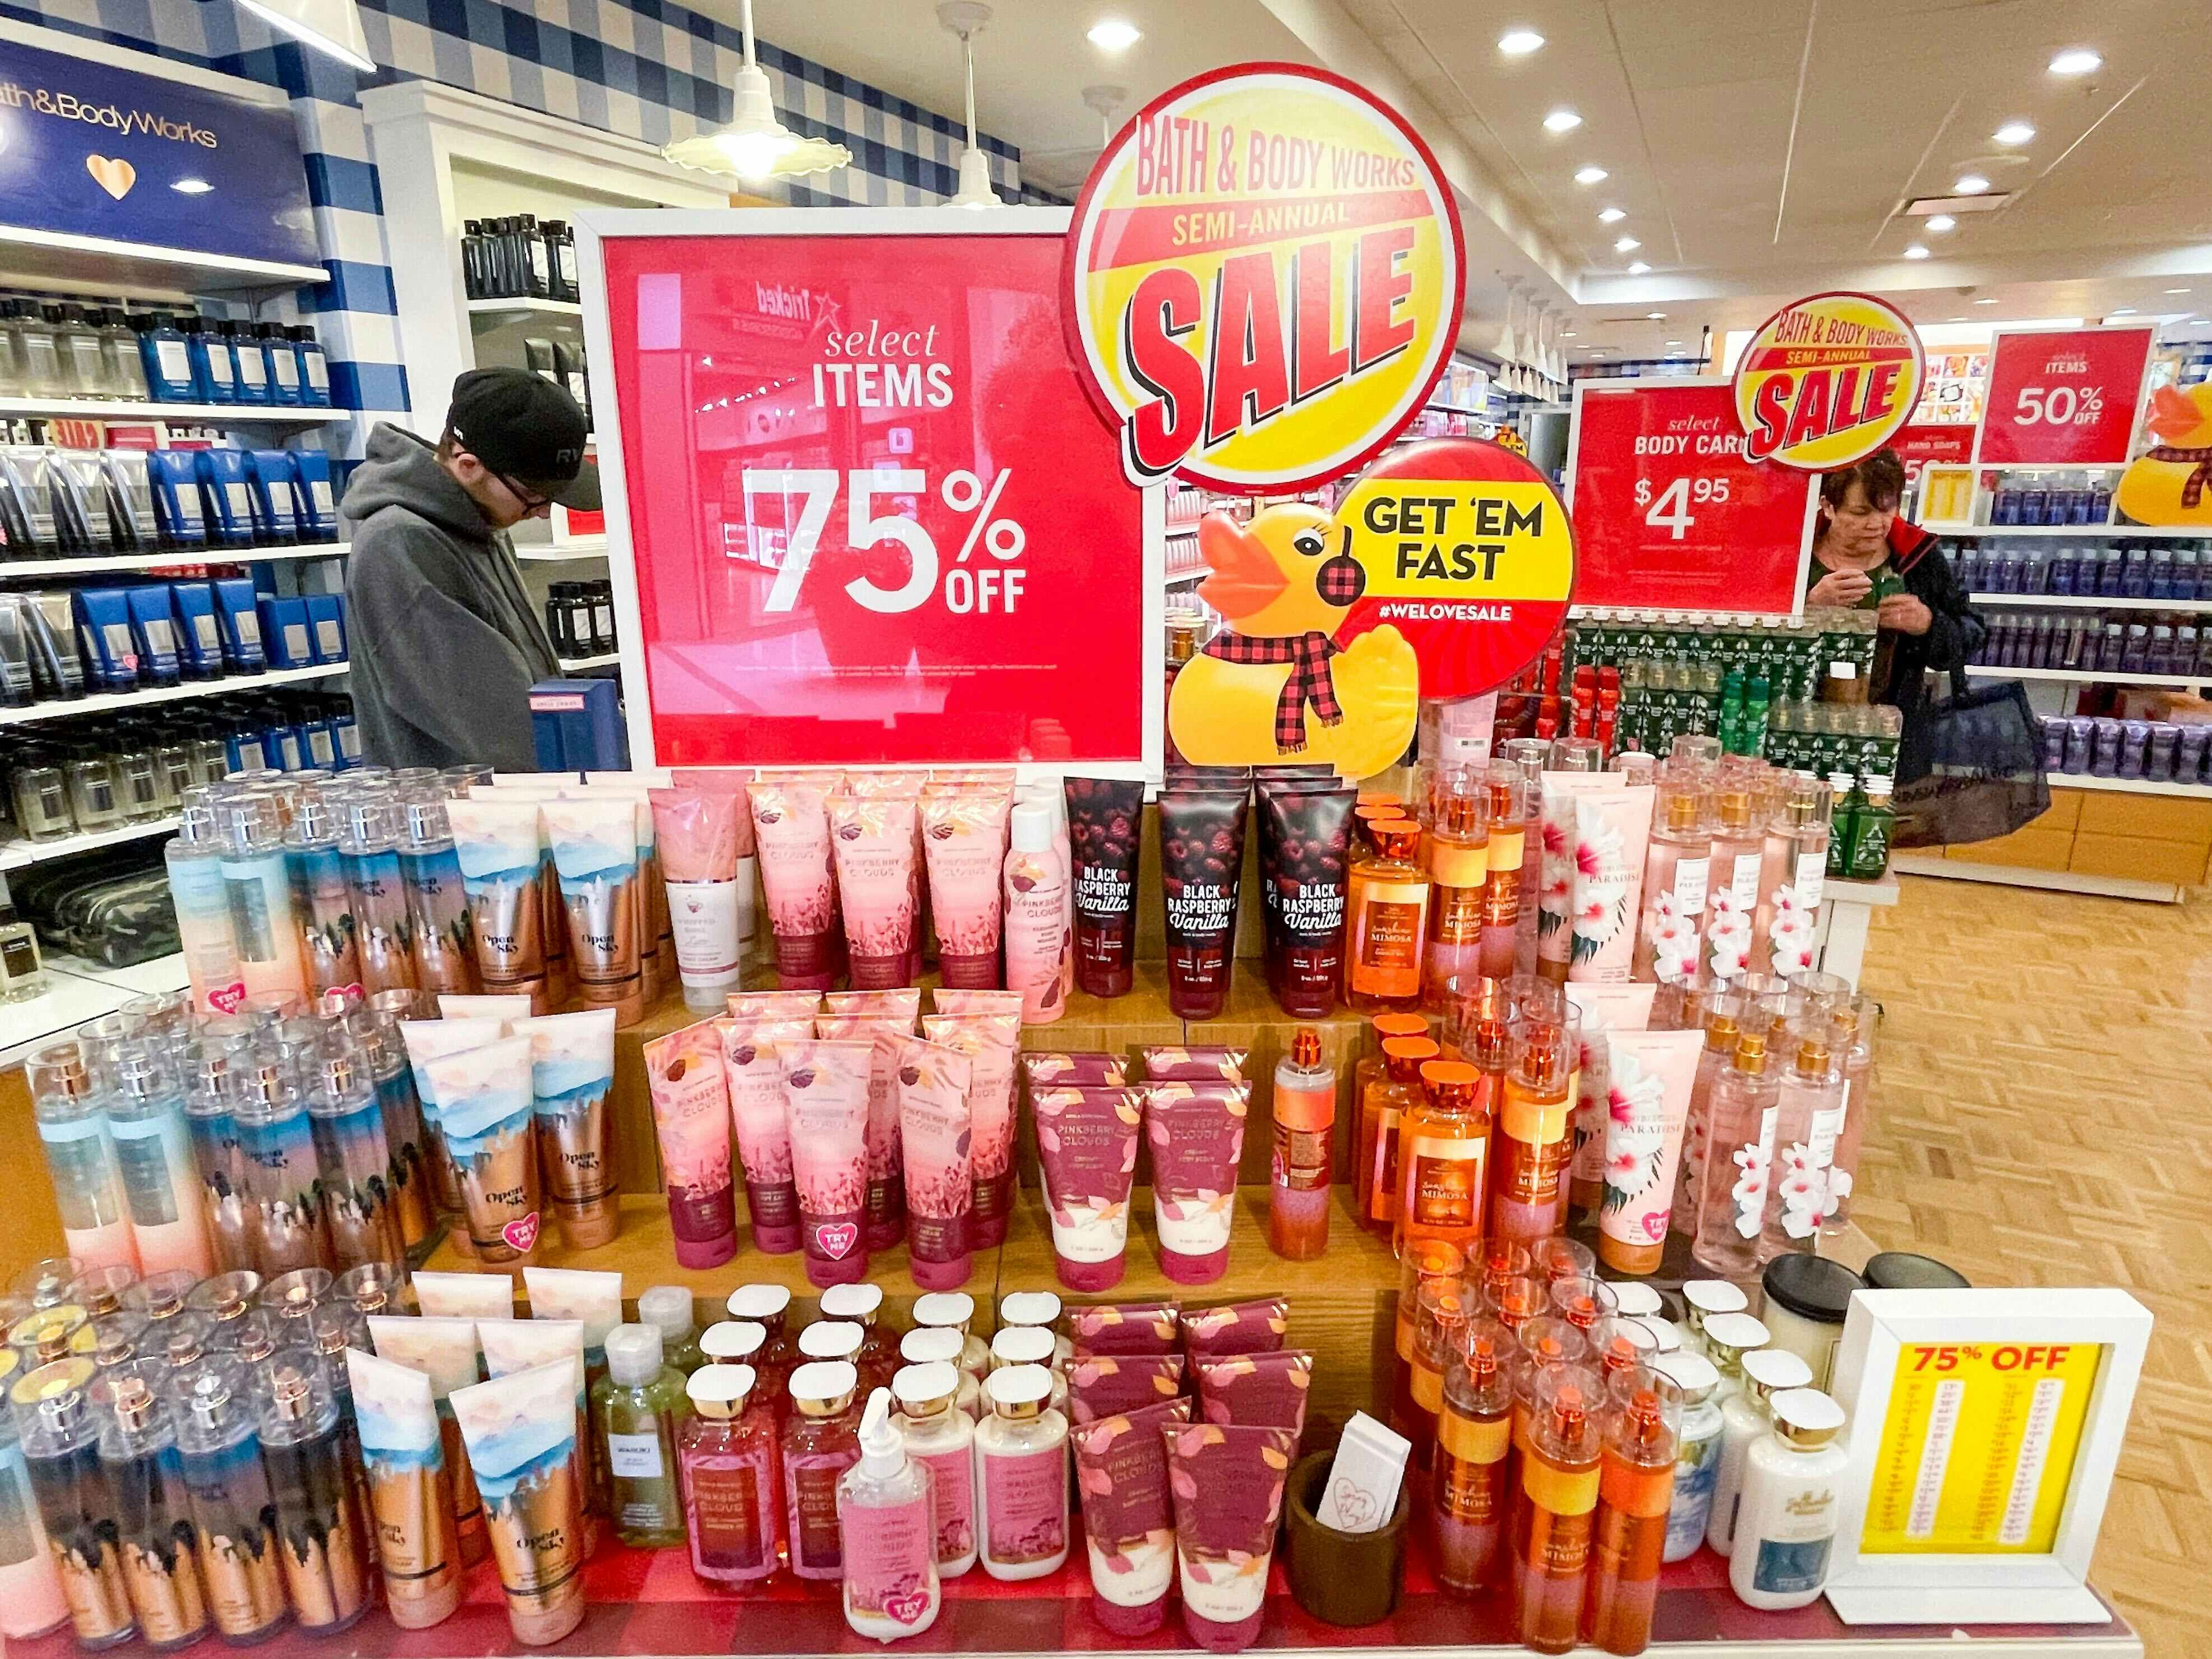 bath and body works sale in store with 75% off signs